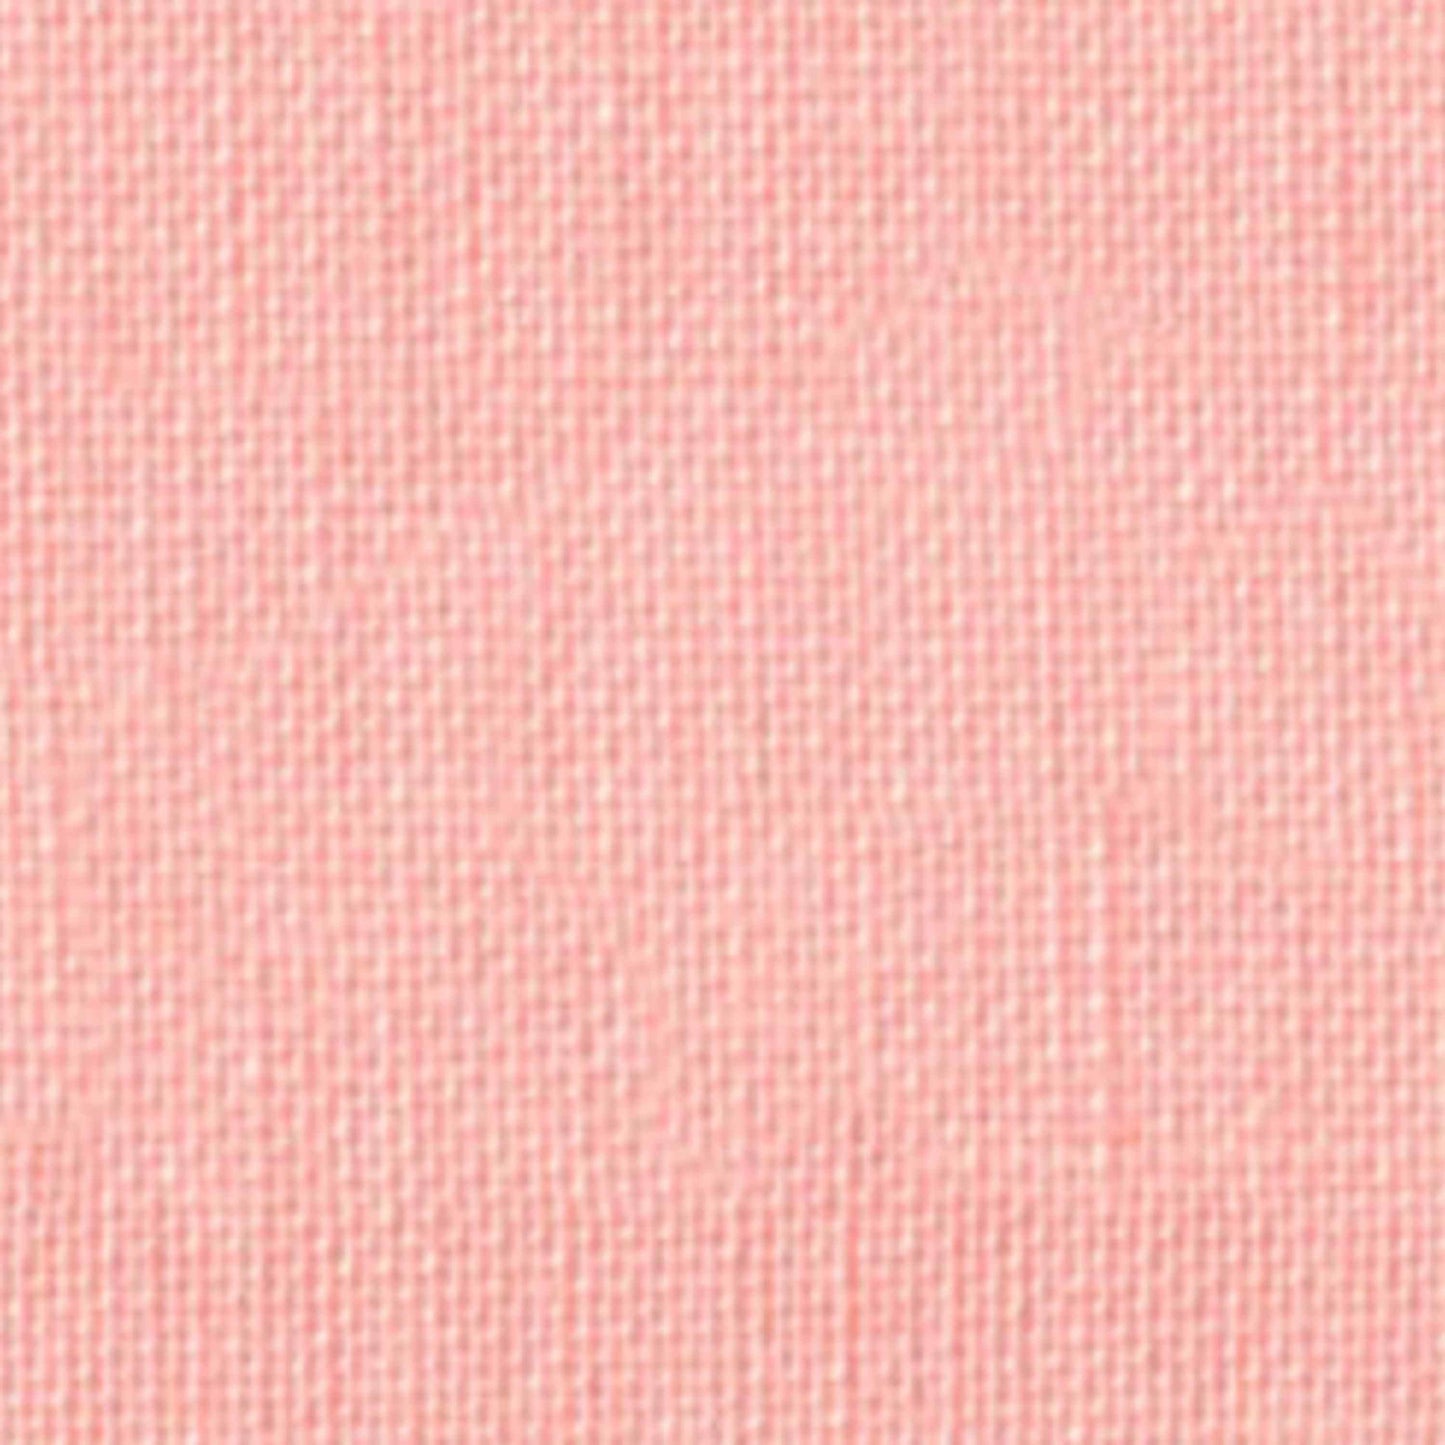 Fabric By The Yard - Blush Cotton Couture Fabric - SC5333-BLUS